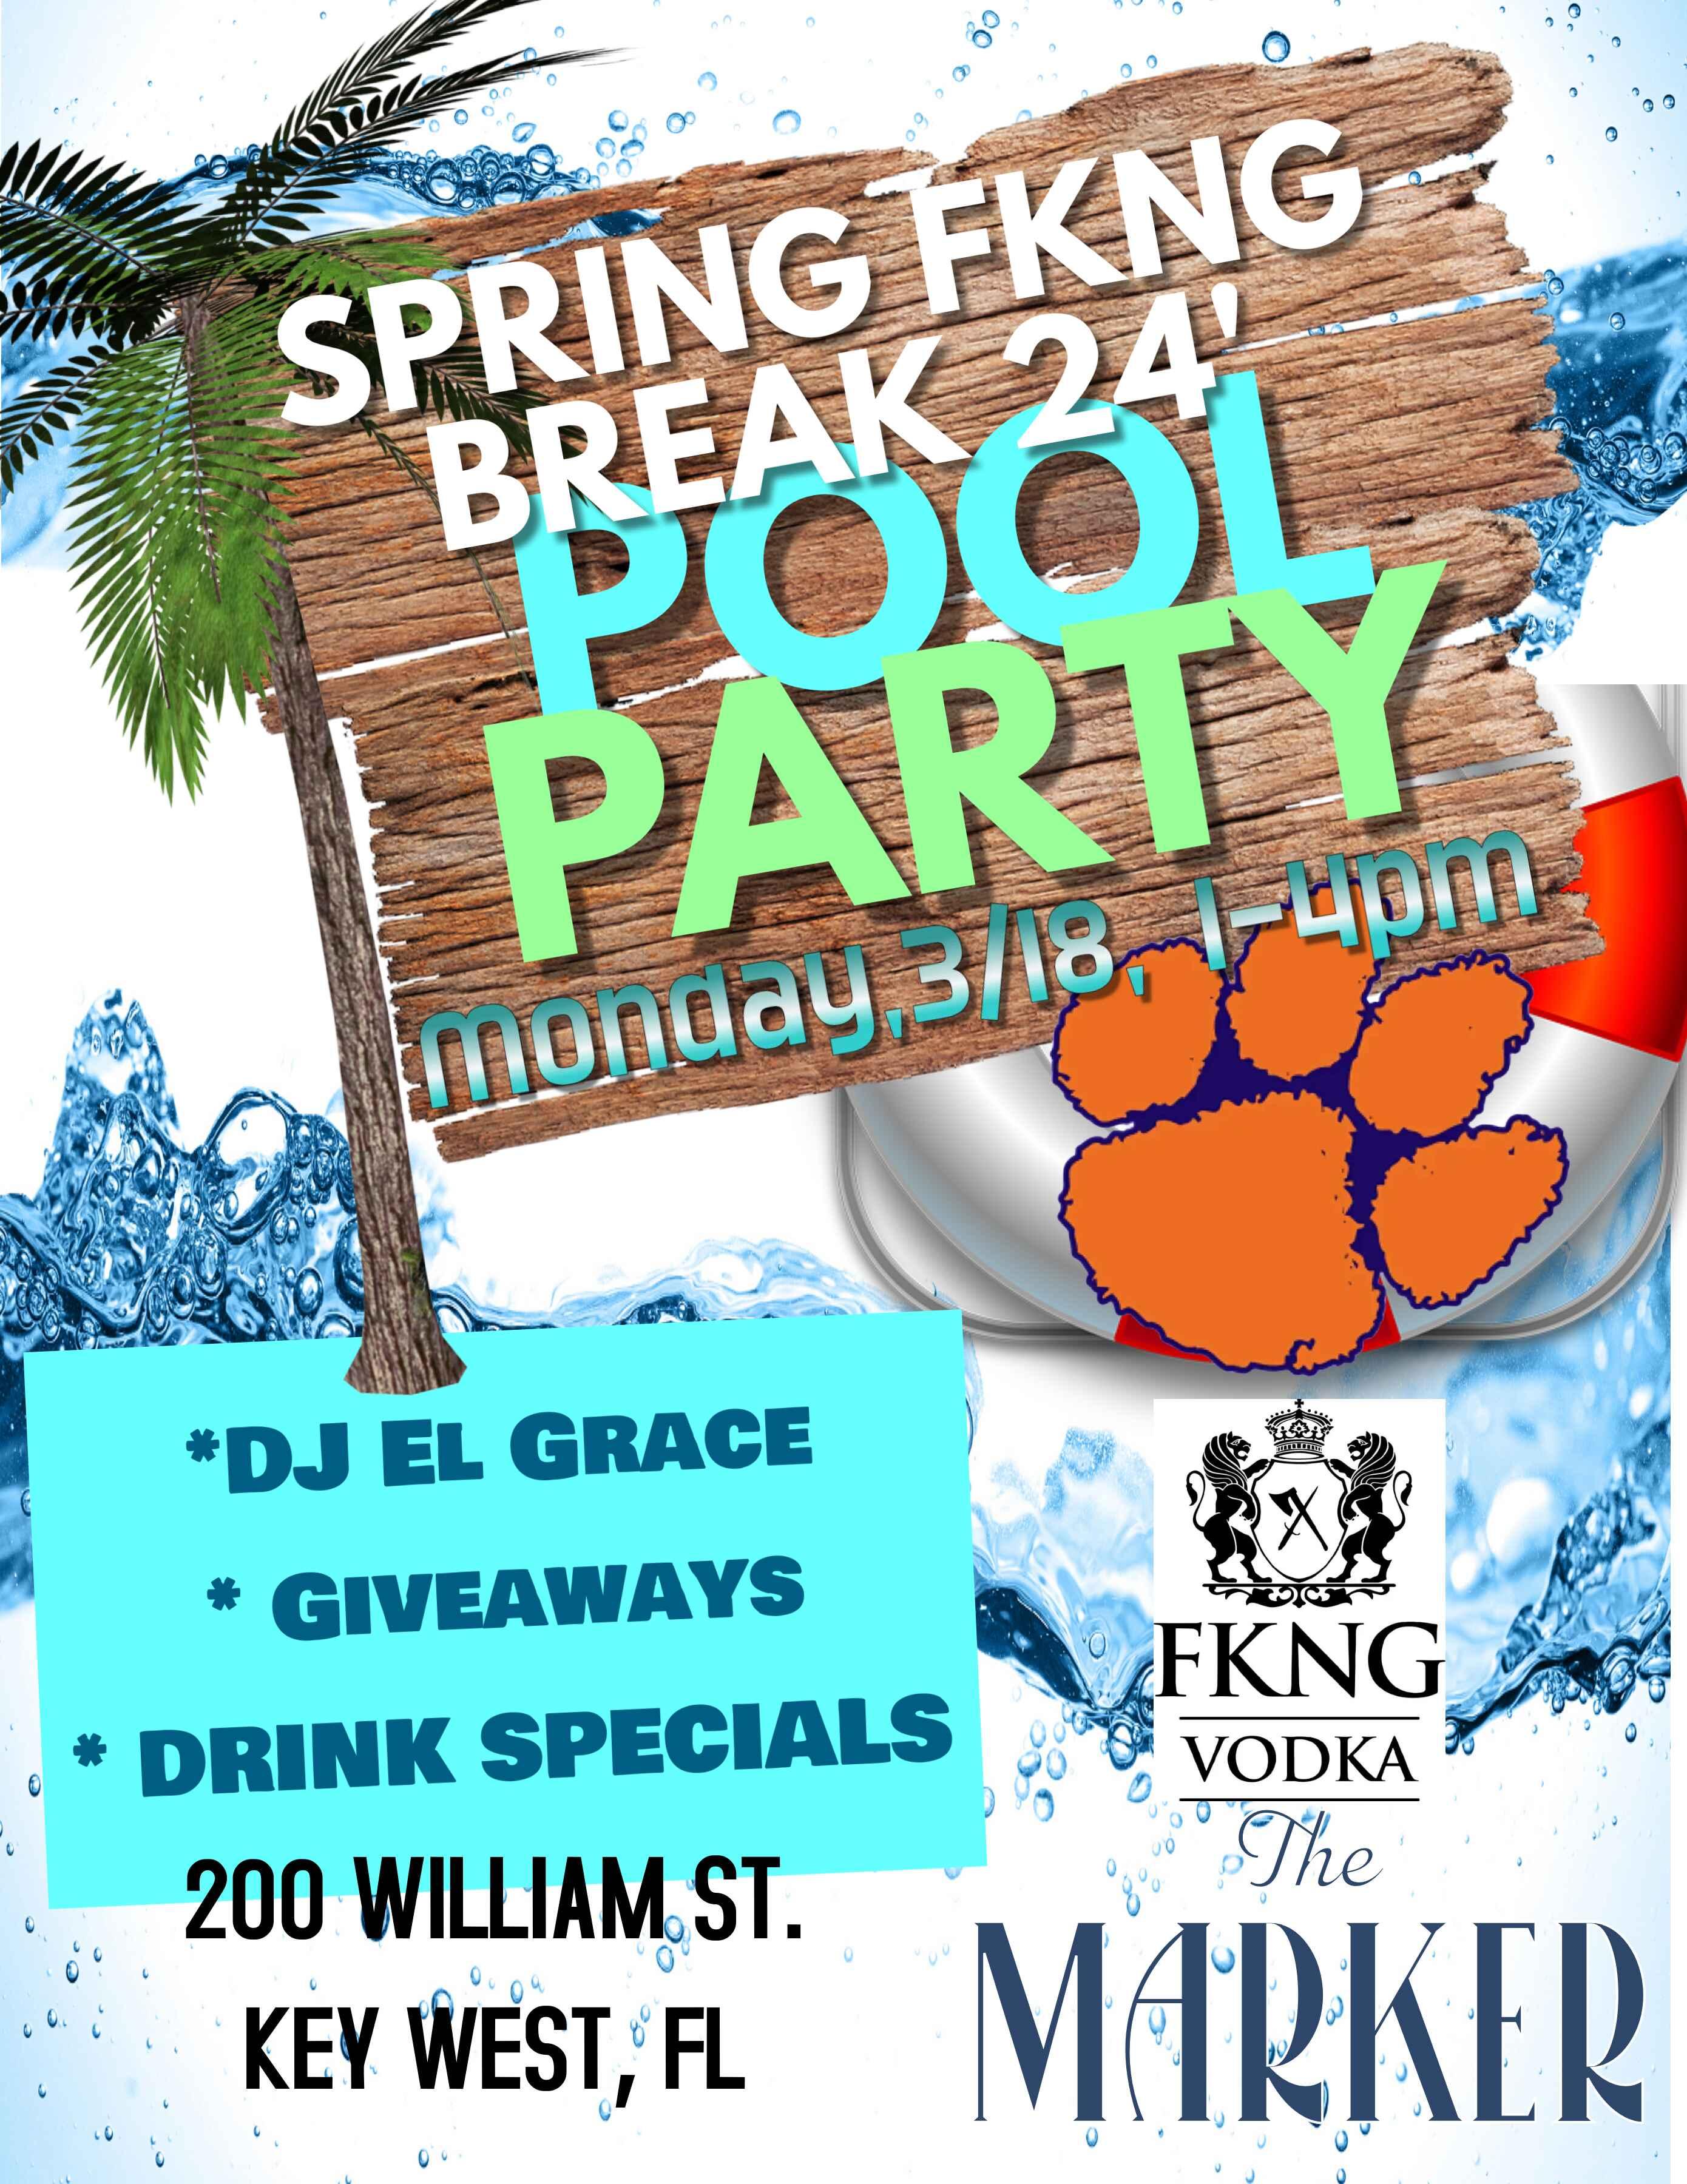 Spring FKNG Break ‘24 Pool Party with DJ El Grace at The Marker